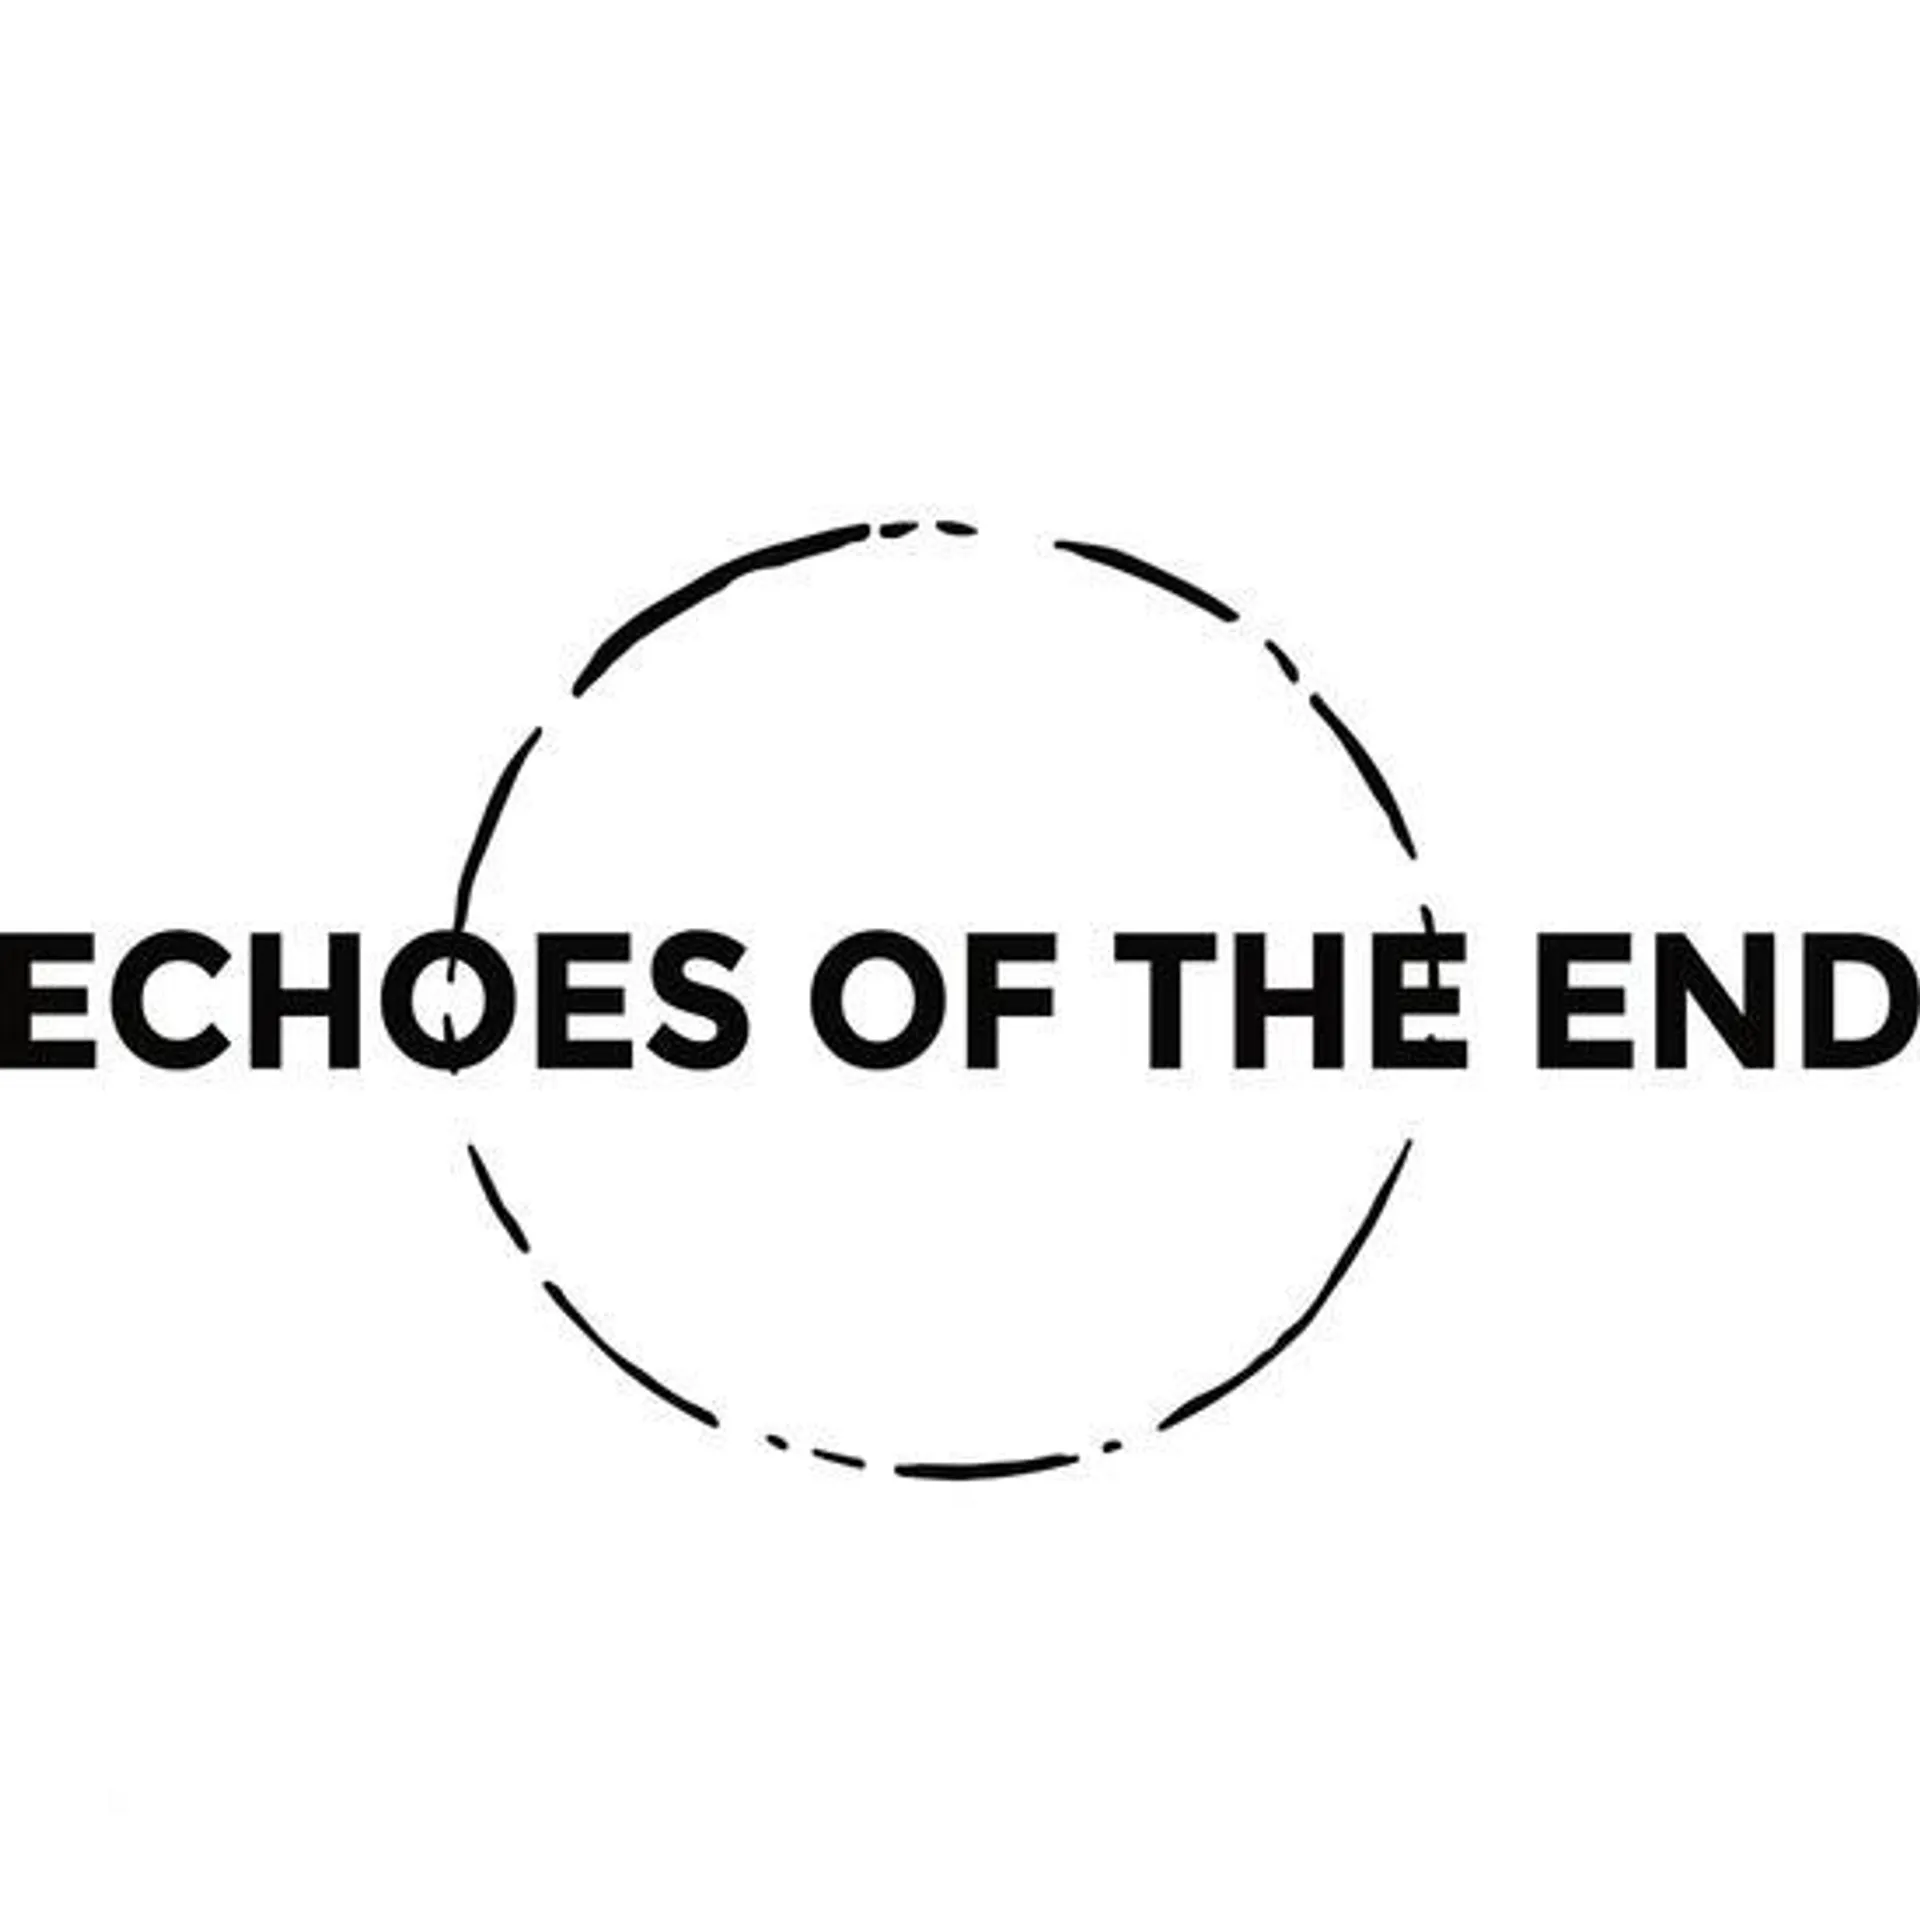 Echoes of the End